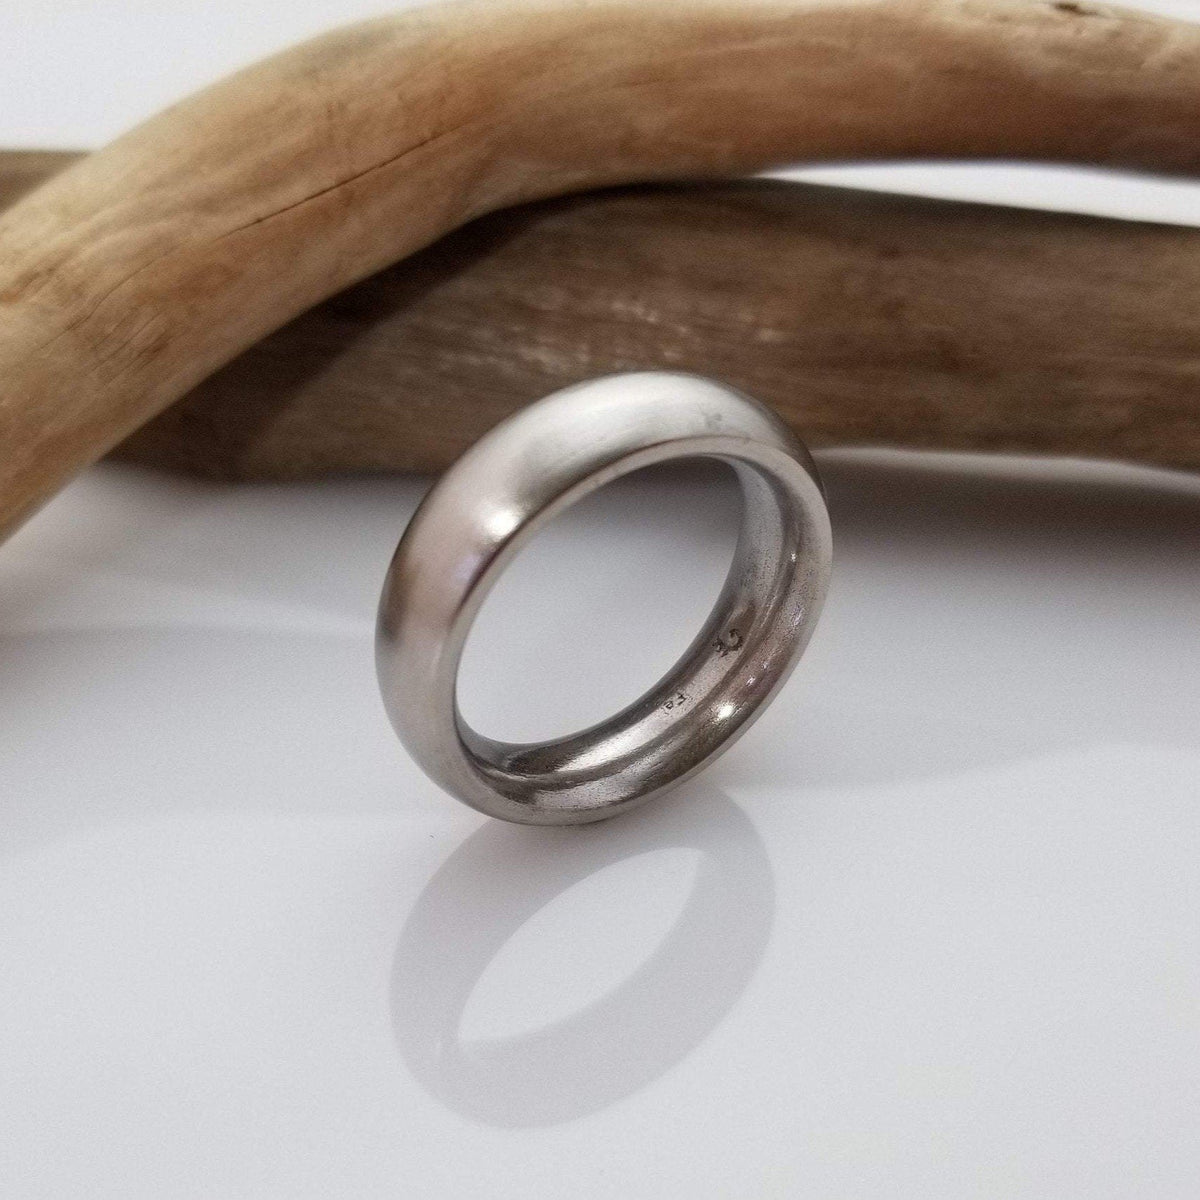 Stainless still iron ring